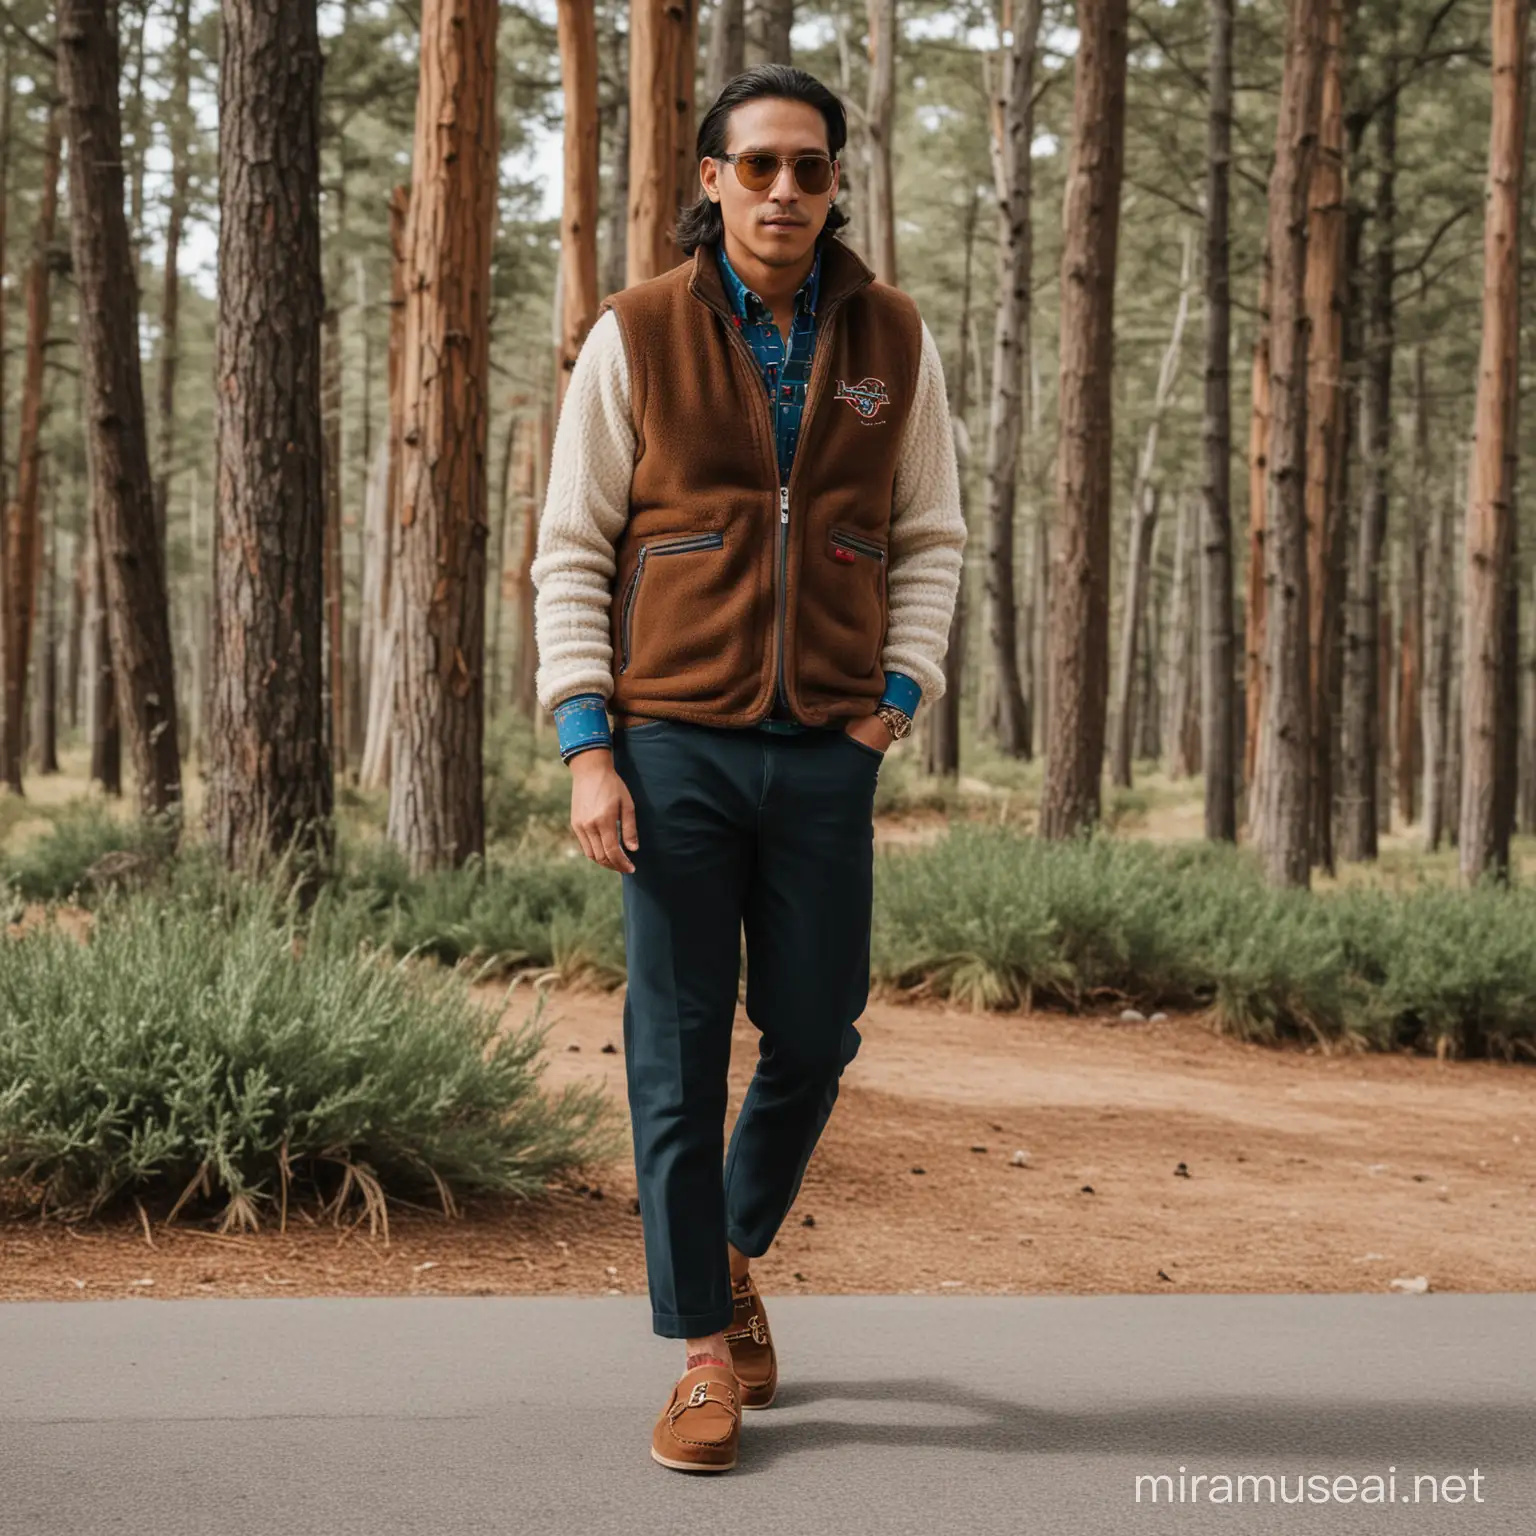 Native American Professional in Stylish Patagonia Fleece Vest and Gucci Loafers